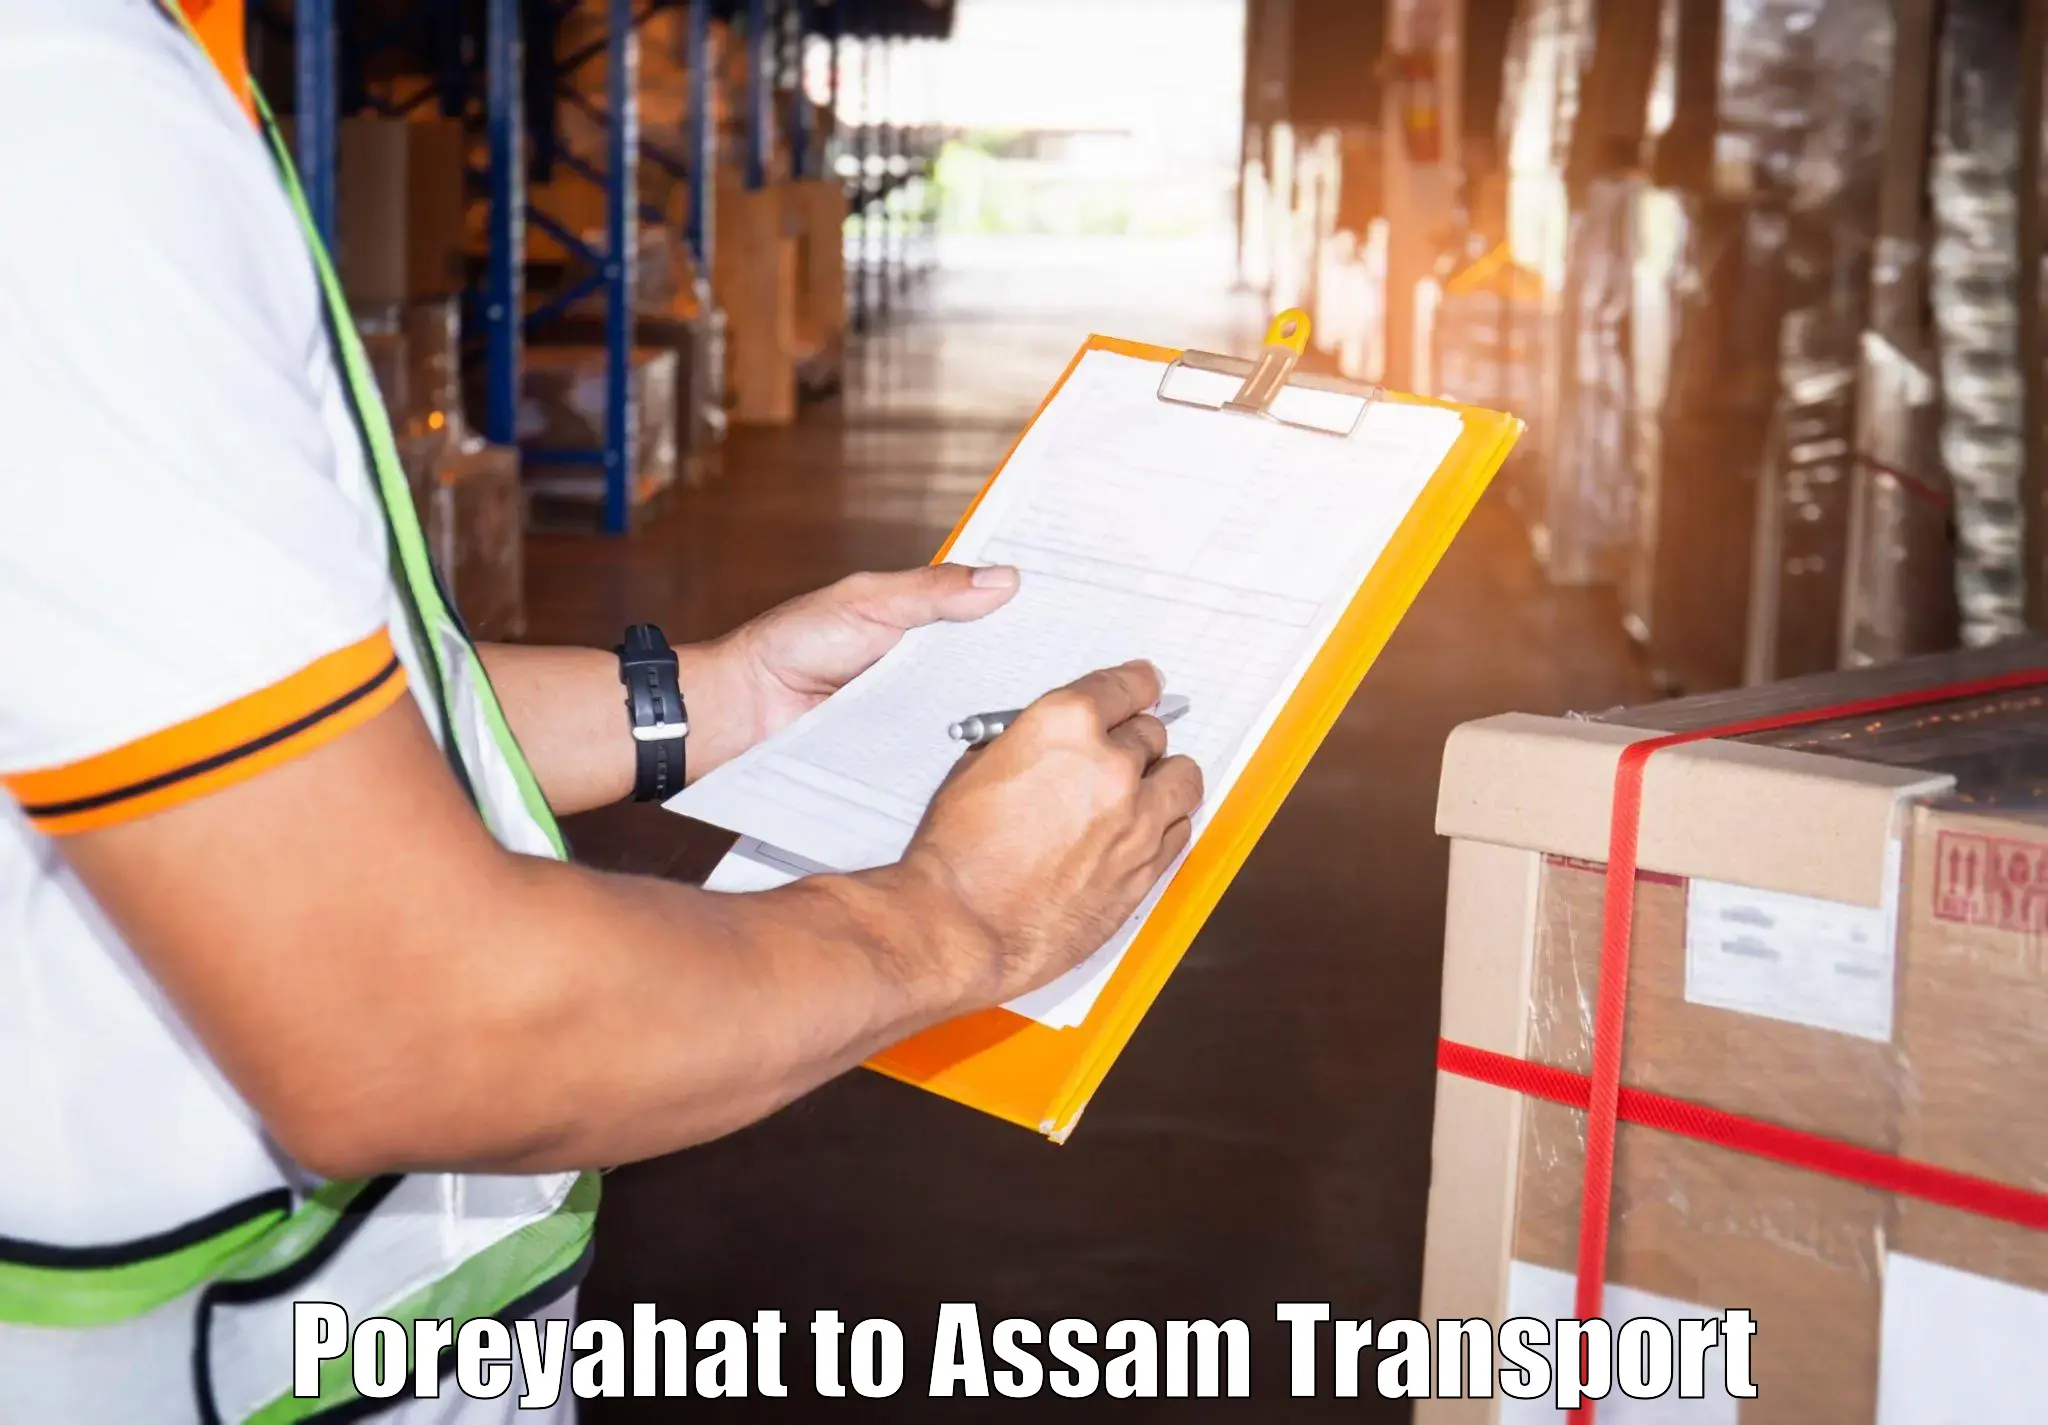 Container transportation services Poreyahat to Lala Assam